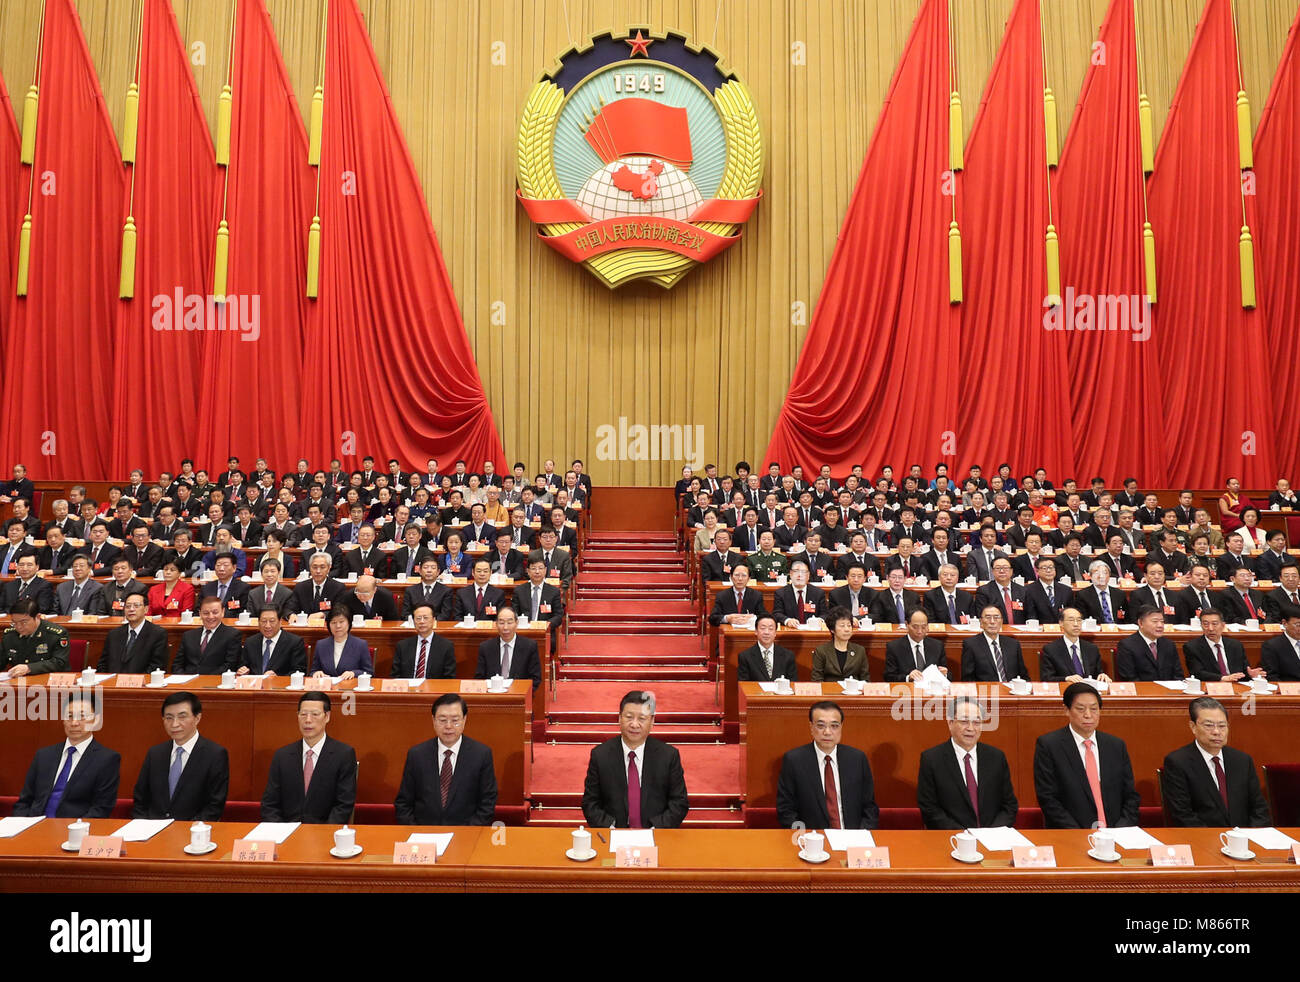 Beijing, China. 15th Mar, 2018. Xi Jinping (C, front), Li Keqiang (4th R, front), Zhang Dejiang (4th L, front), Yu Zhengsheng (3rd R, front), Zhang Gaoli (3rd L, front), Li Zhanshu (2nd R, front), Wang Huning (2nd L, front), Zhao Leji (1st R, front) and Han Zheng (1st L, front) attend the closing meeting of the First Session of the 13th National Committee of the Chinese People's Political Consultative Conference (CPPCC) at the Great Hall of the People in Beijing, capital of China, March 15, 2018. Credit: Ding Lin/Xinhua/Alamy Live News Stock Photo